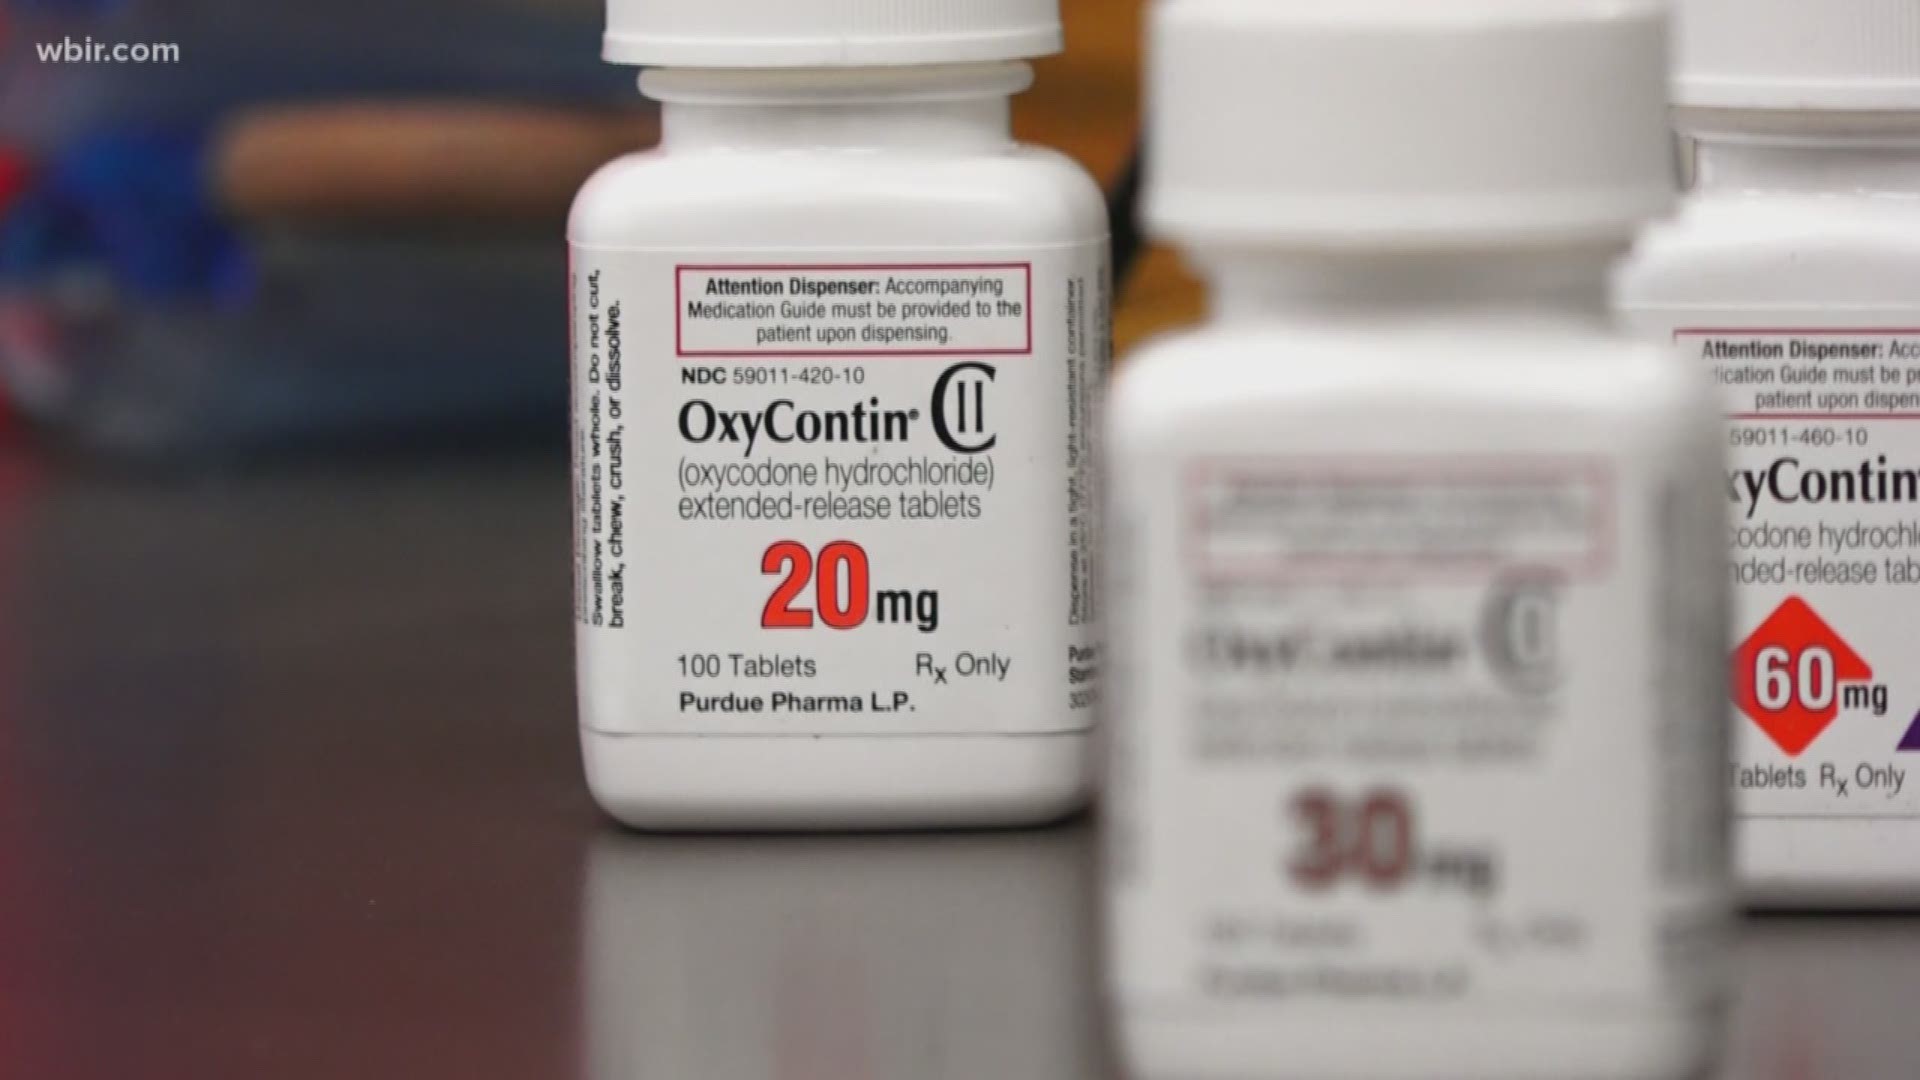 Blue Cross Blue Shield is going to stop paying for the well-known pain medication oxycontin in Tennessee.